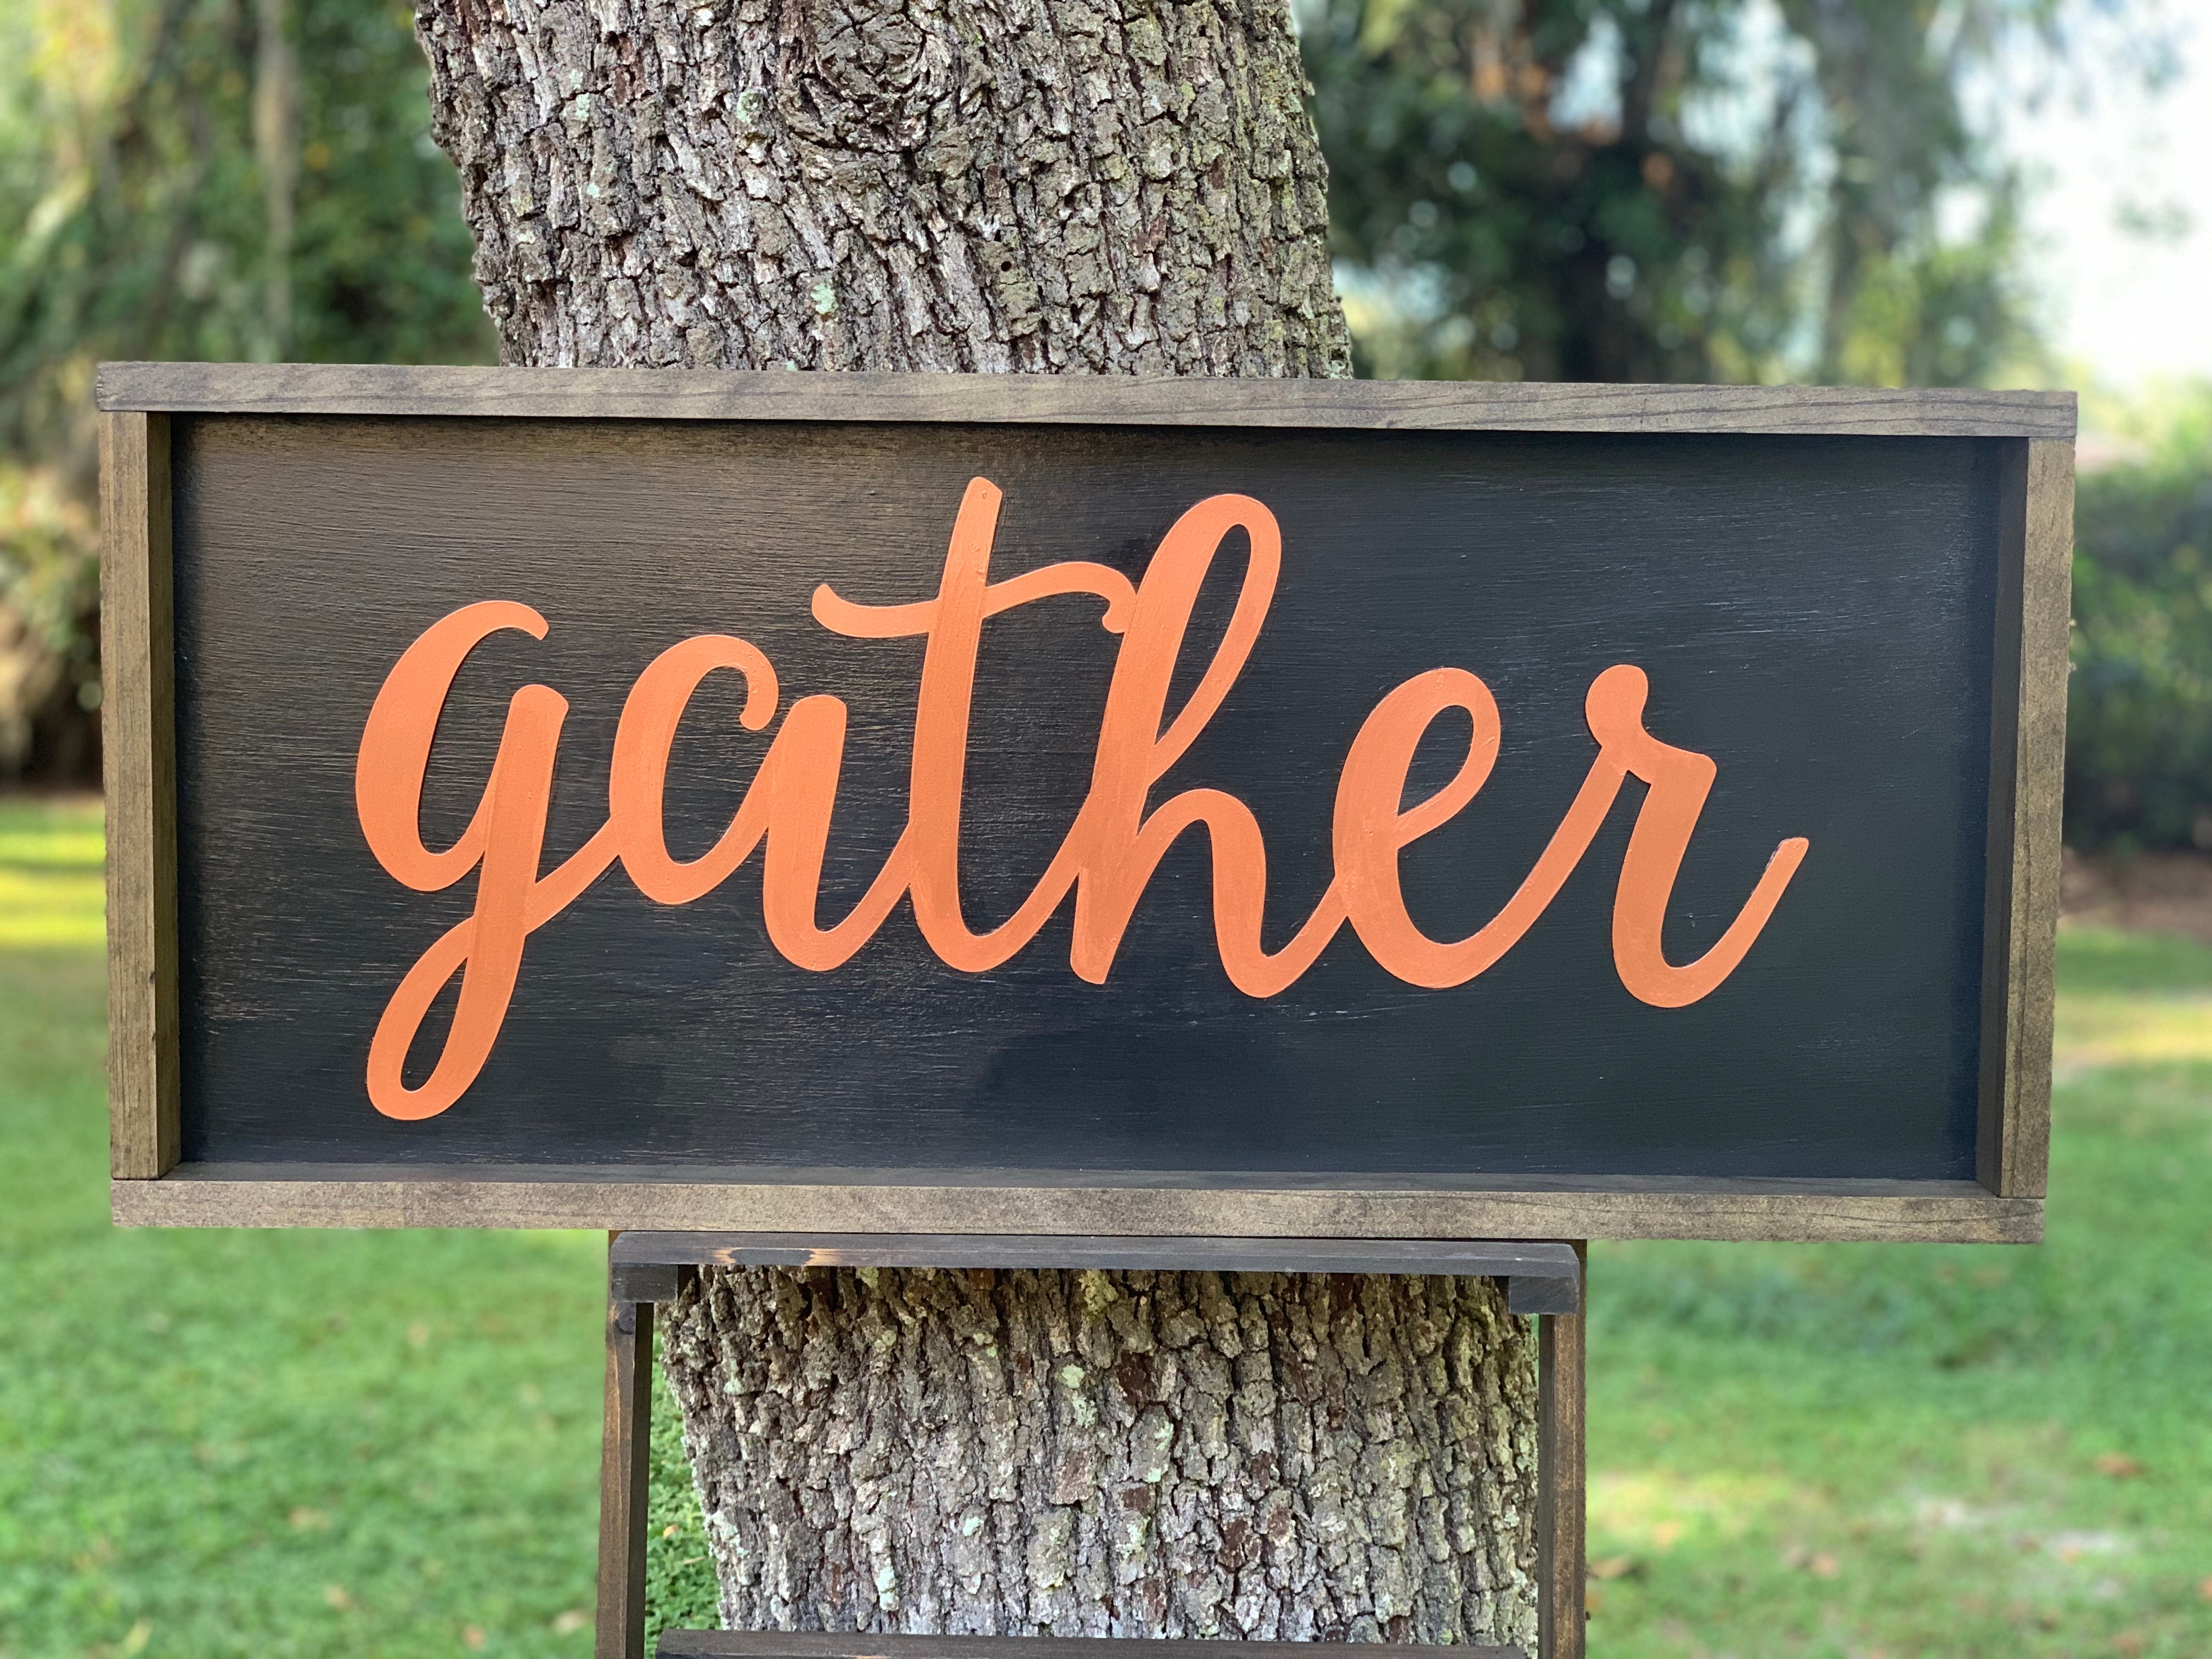 Metallic Gather Sign shows an image of the sign sitting outside on a ladder.